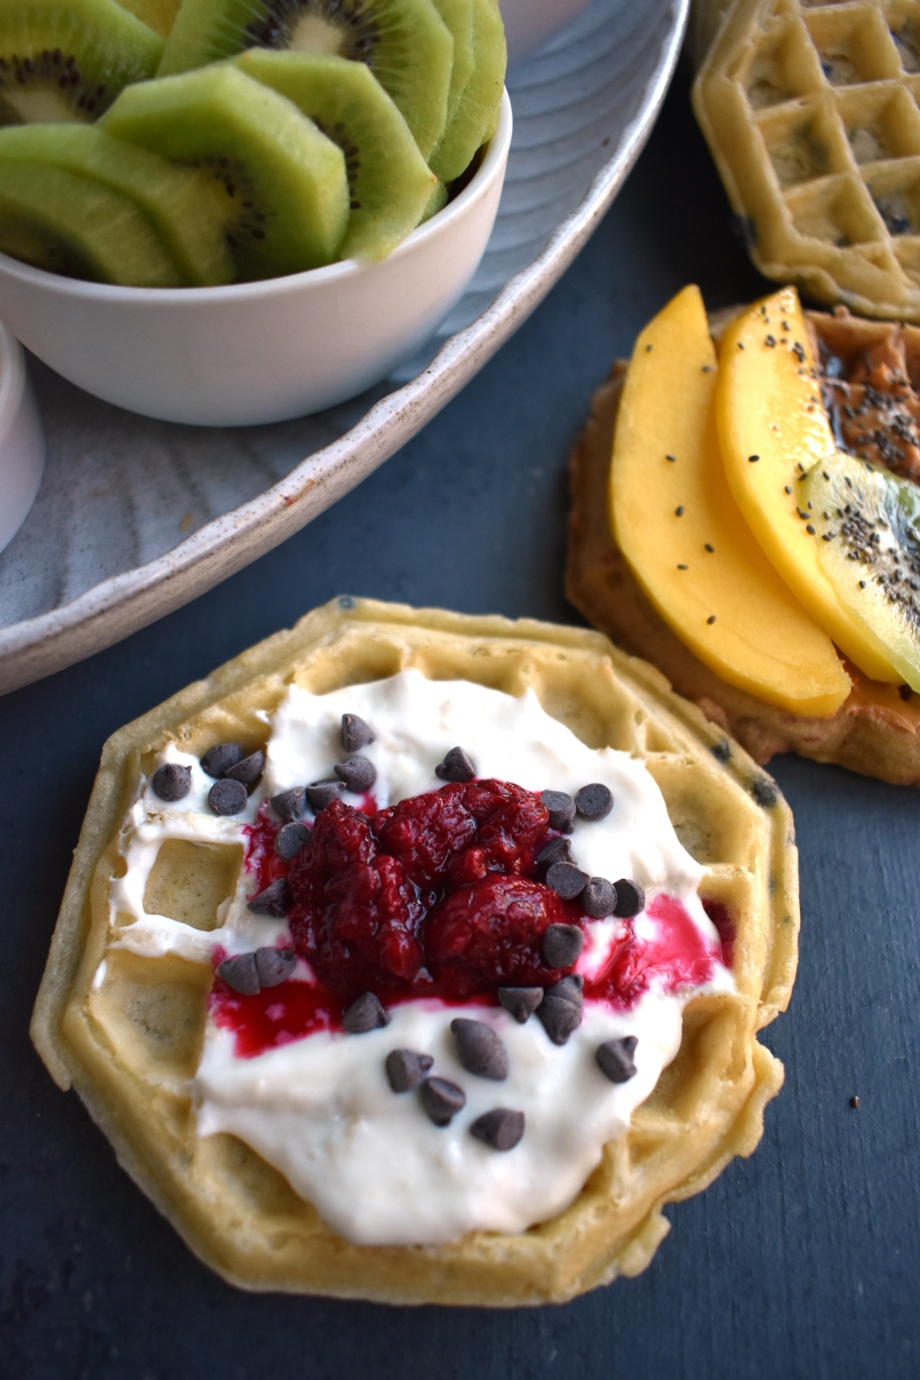 Make Your Own Waffle Bar features tons of fun toppings including fresh fruit, nuts, yogurt, raspberry sauce, maple syrup, peanut butter, chocolate chips and more! www.nutritionistreviews.com